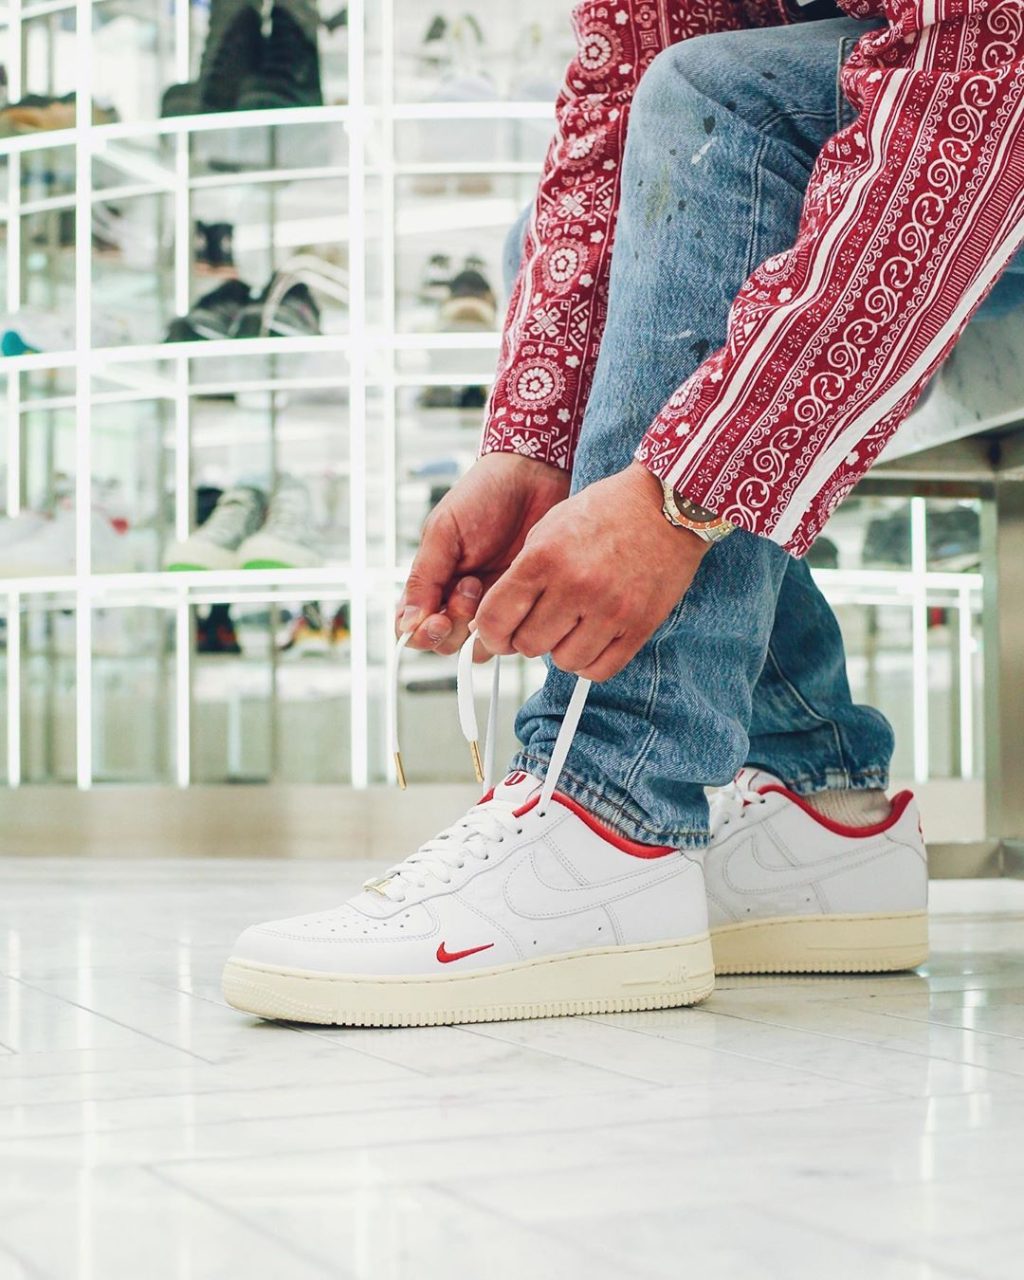 kith-nike-air-force-1-low-red-release-20200704